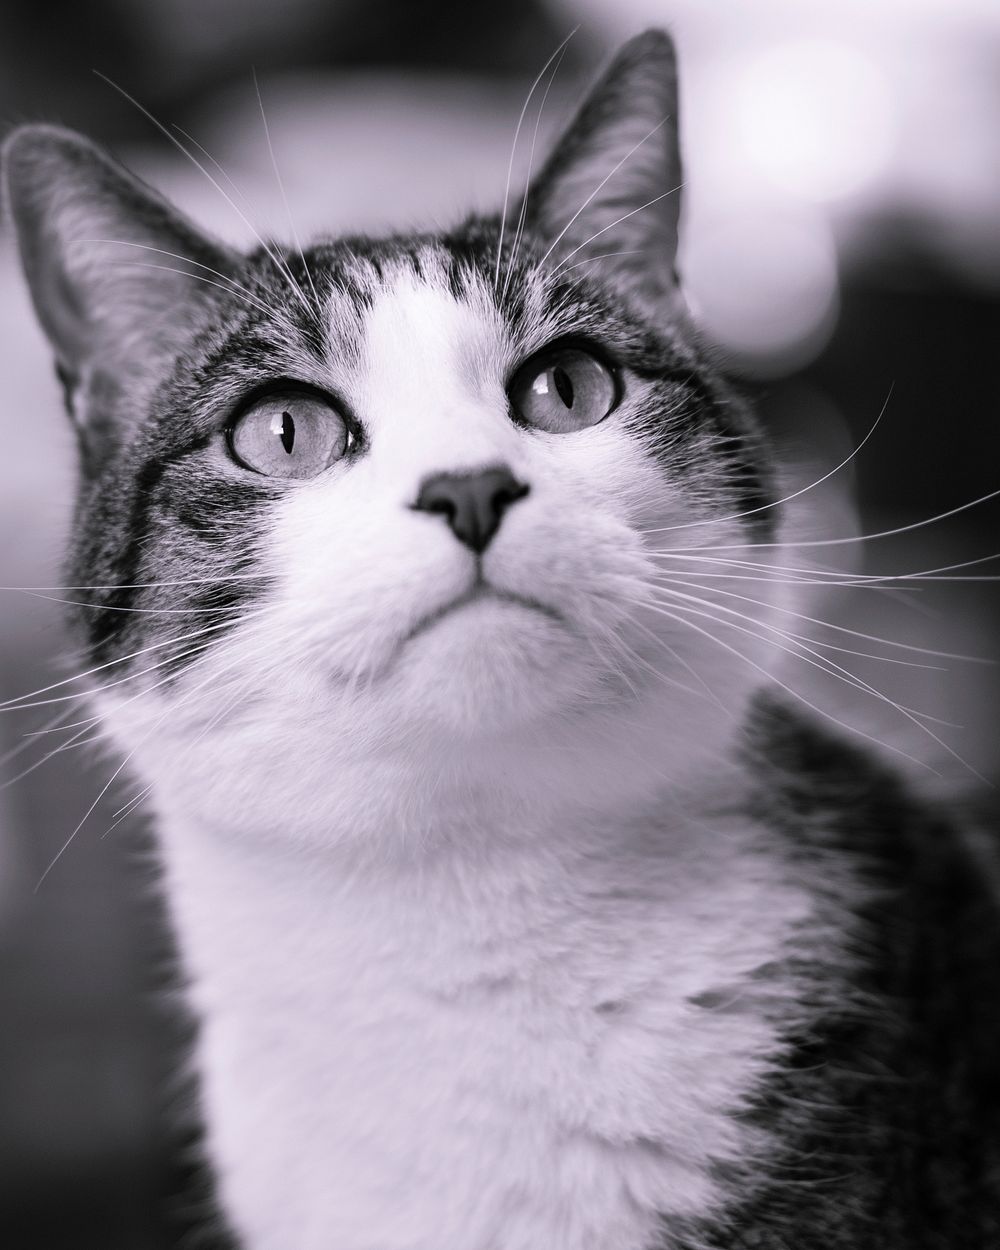 Cat looking up, monotone. Original public domain image from Flickr